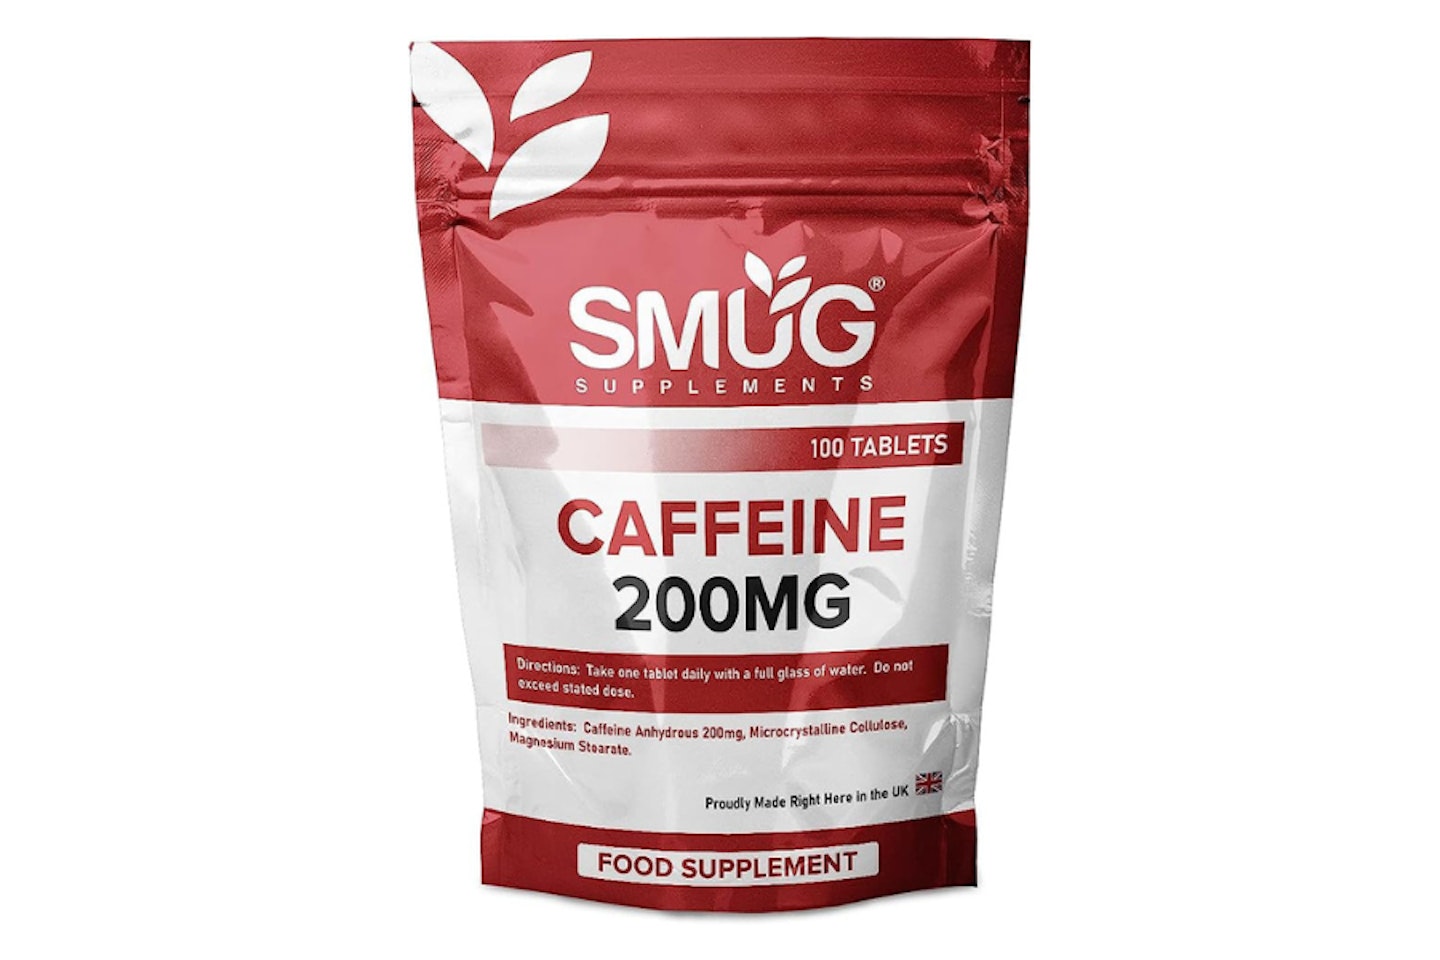 Caffeine Tablets by SMUG Supplements - 200mg